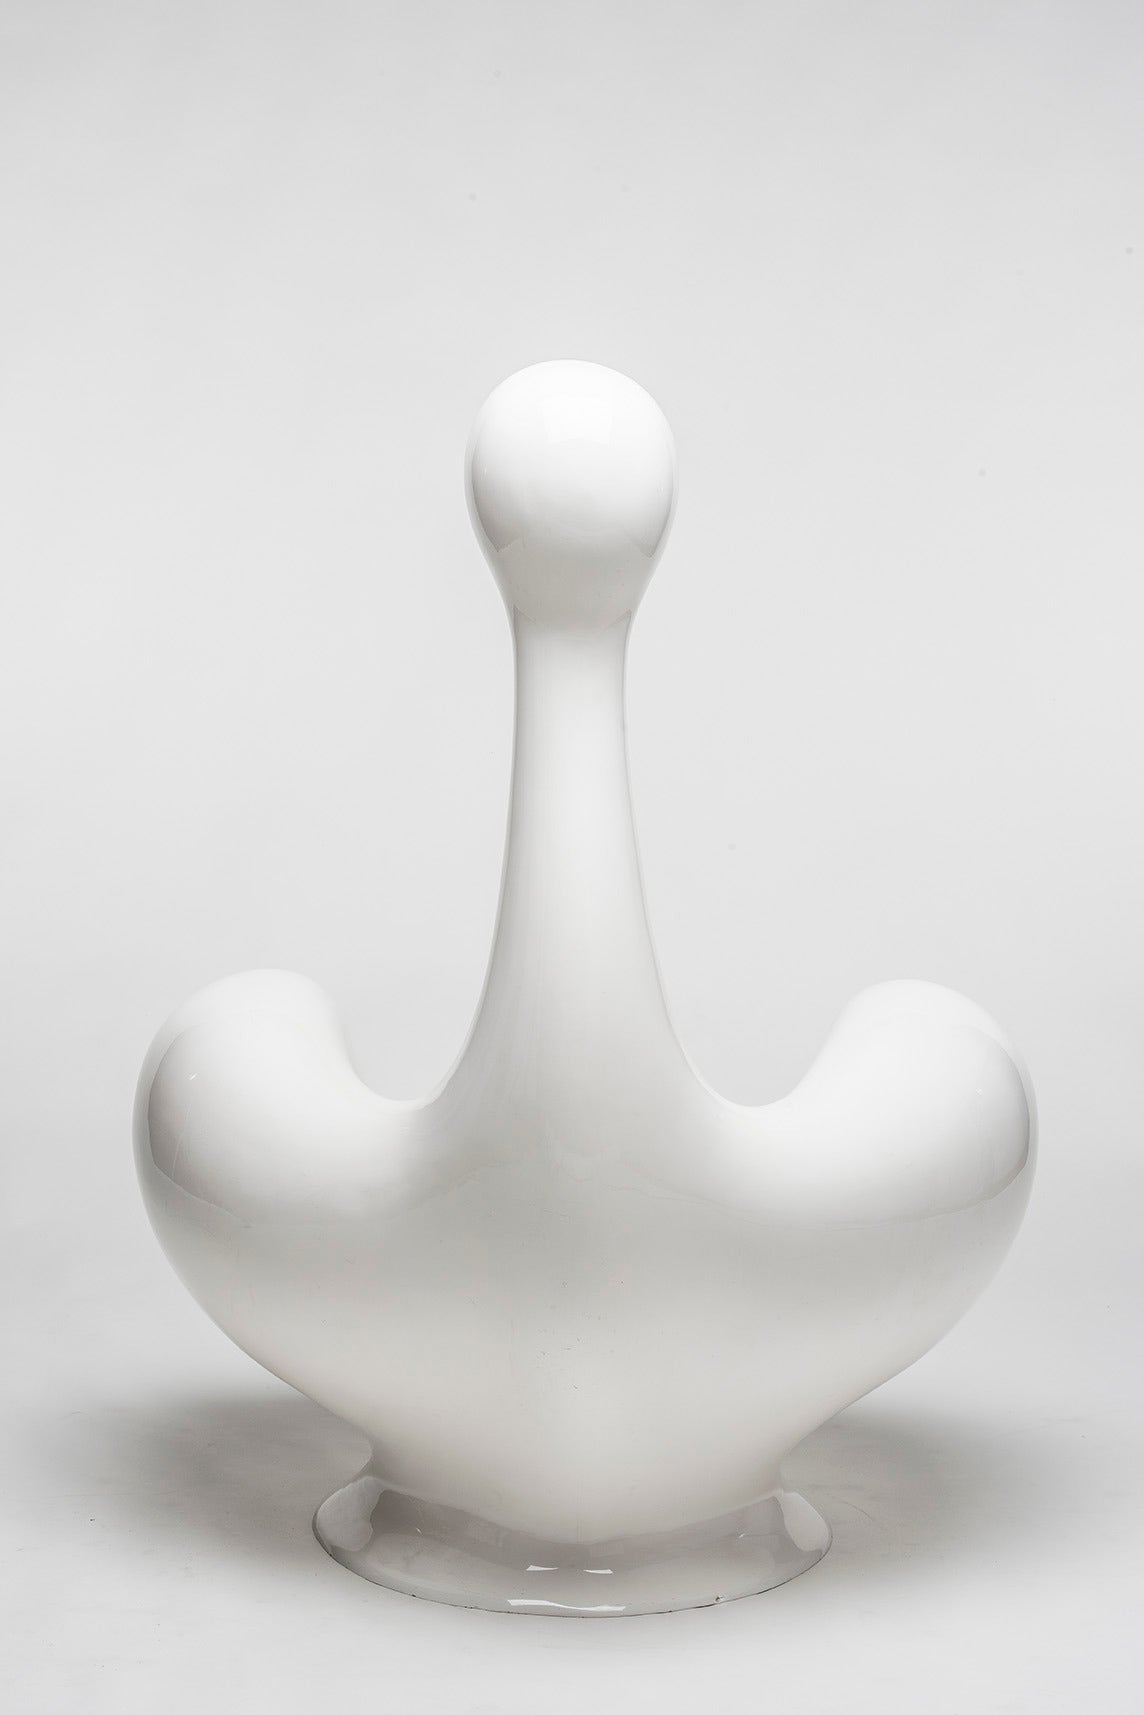 Angelheart armchair designed by Huub and Aleid Kortekaas, moulded form, white painted polyester, 1970.